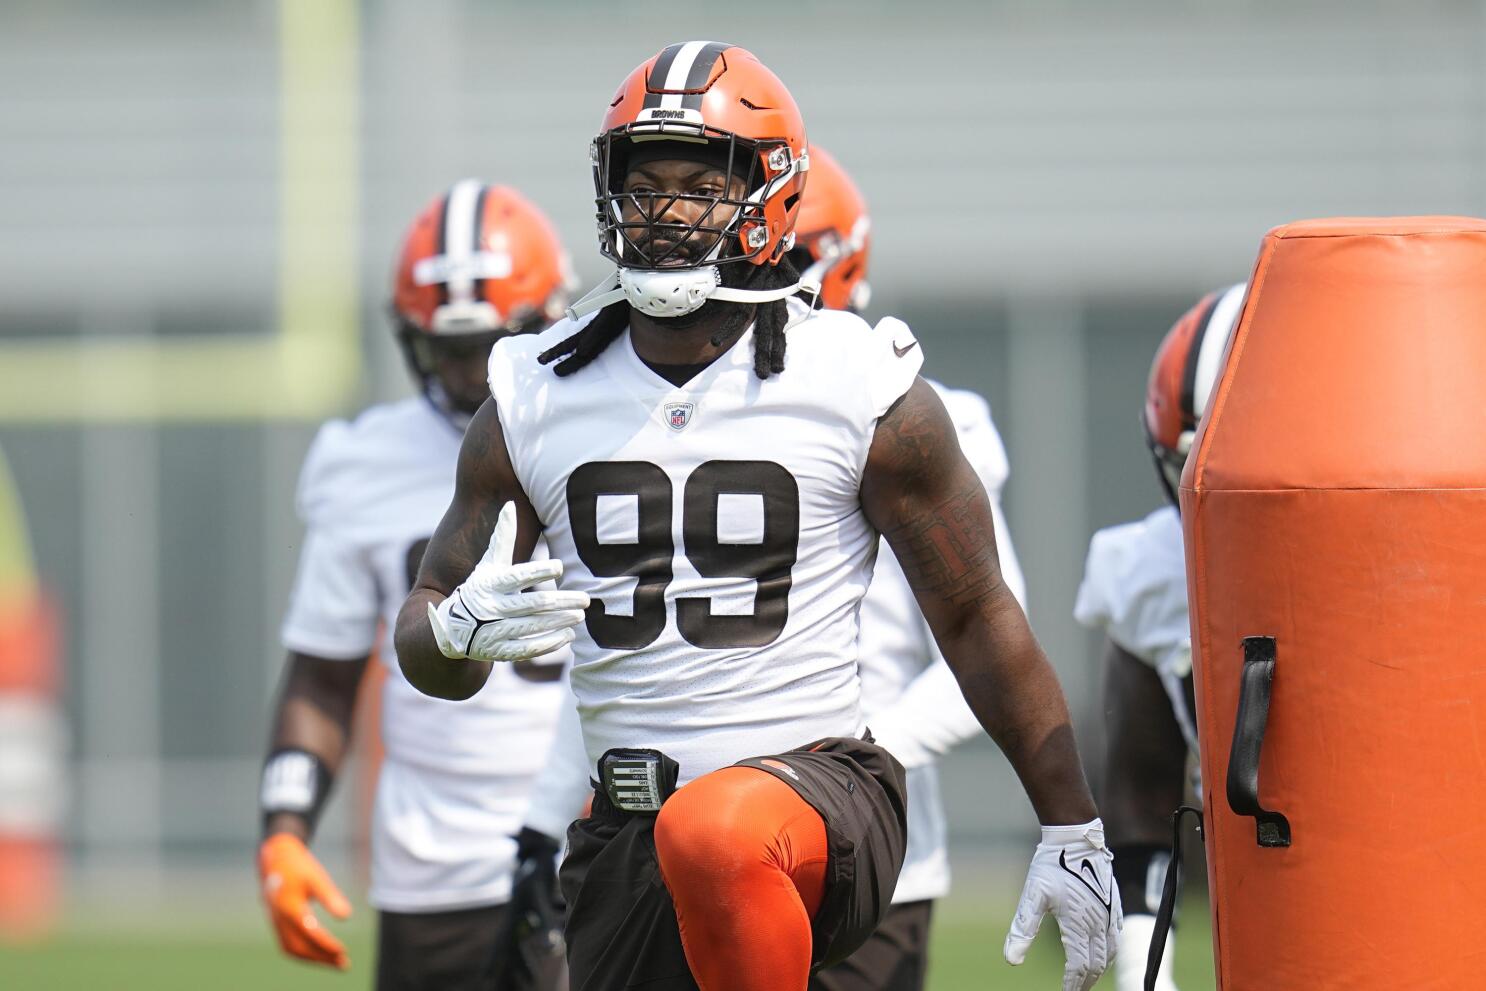 Za'Darius Smith excited to have 'hand in the dirt' with Browns